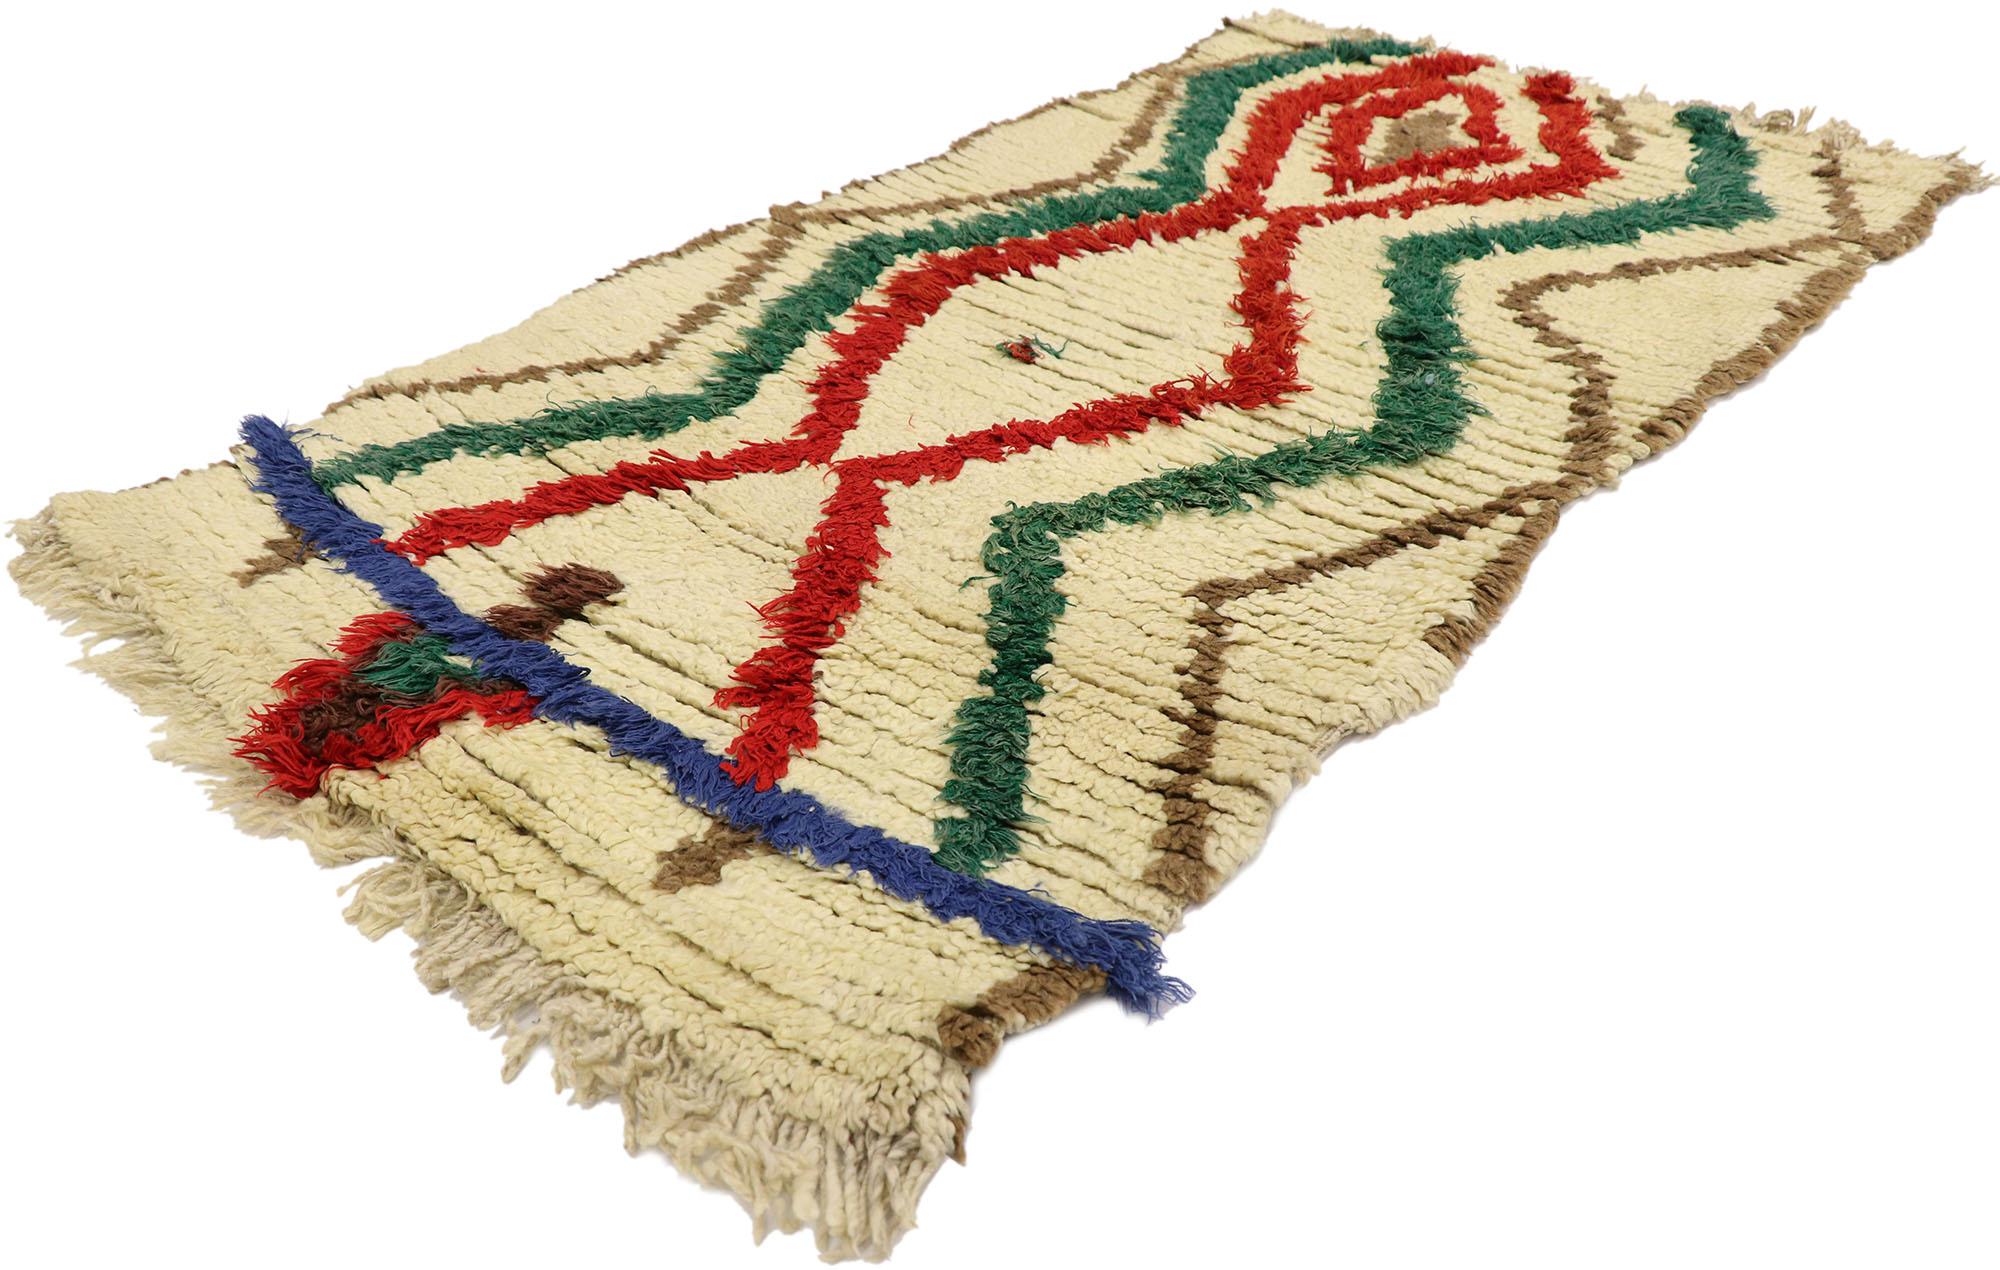 21554 Vintage Moroccan Azilal Rug, 02'06 x 04'05.
​Nomadic charm meets tribal style in this hand knotted wool vintage Berber Moroccan Azilal rug. The perfectly imperfect chevron design and nature-inspired color palette woven into this piece work